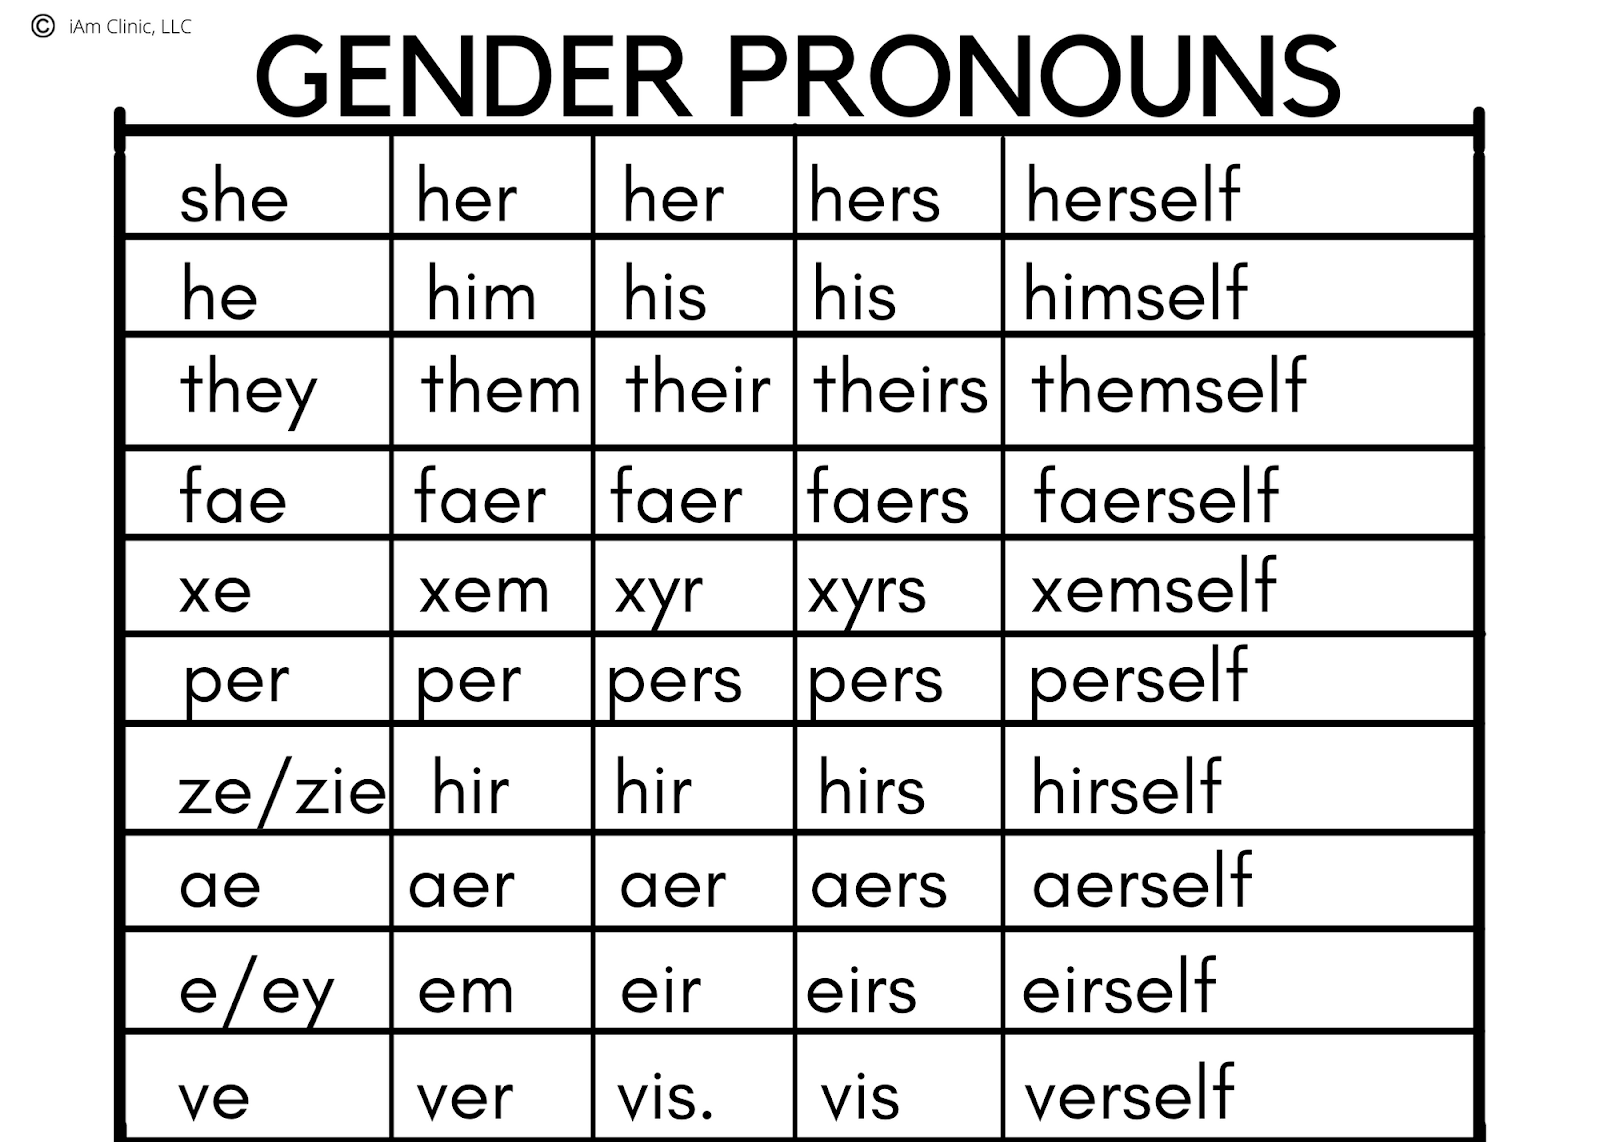 what-are-pronouns-gender-heritagegai